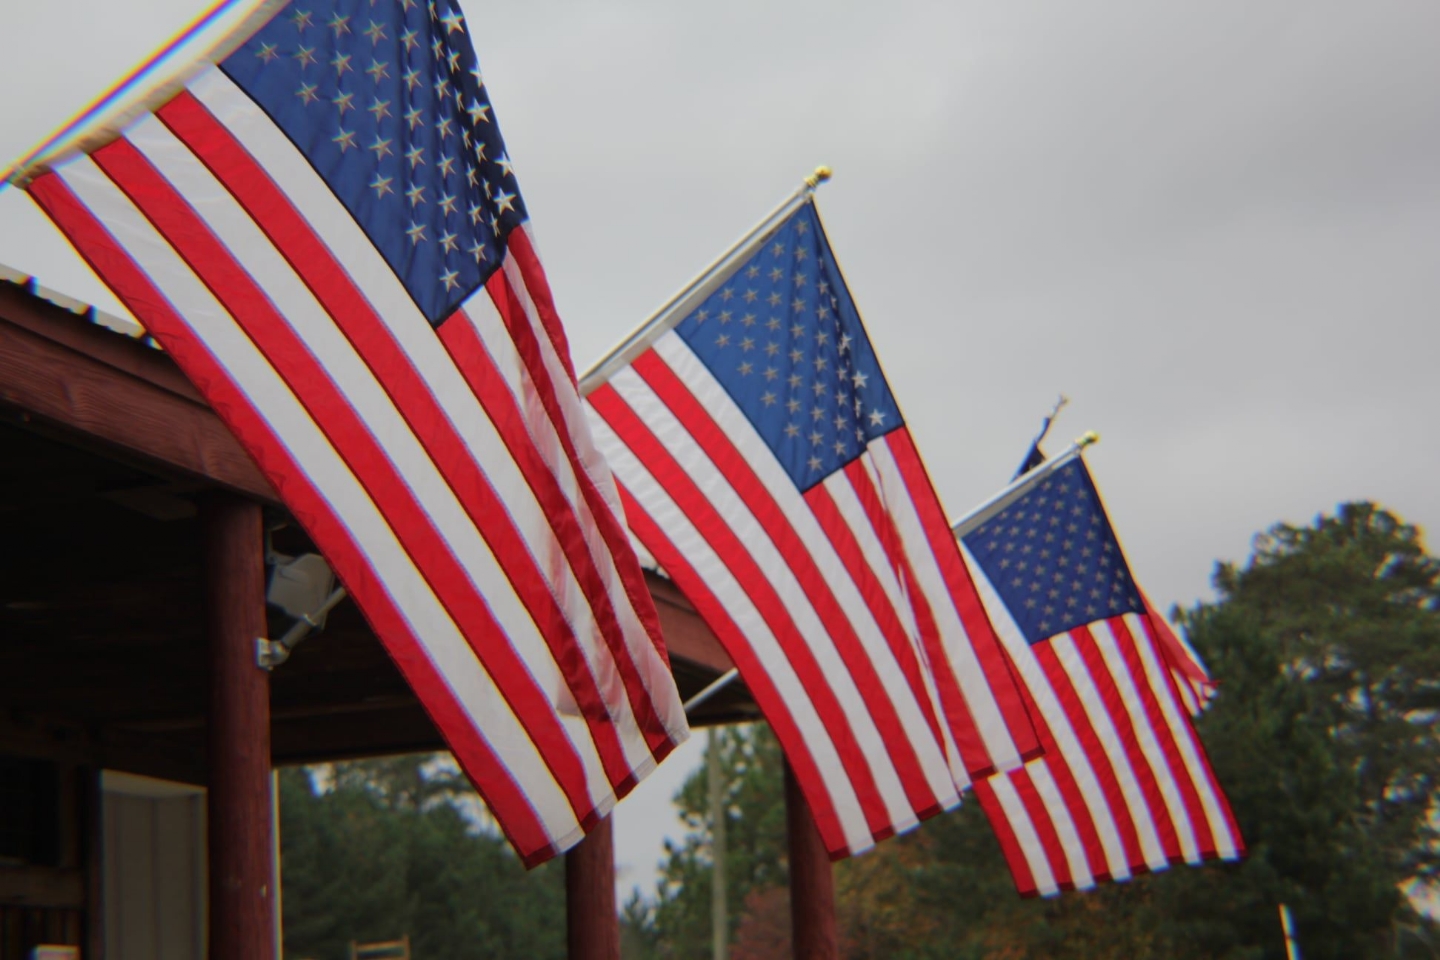 Our American Flag and the flags of all our Branches of Service.